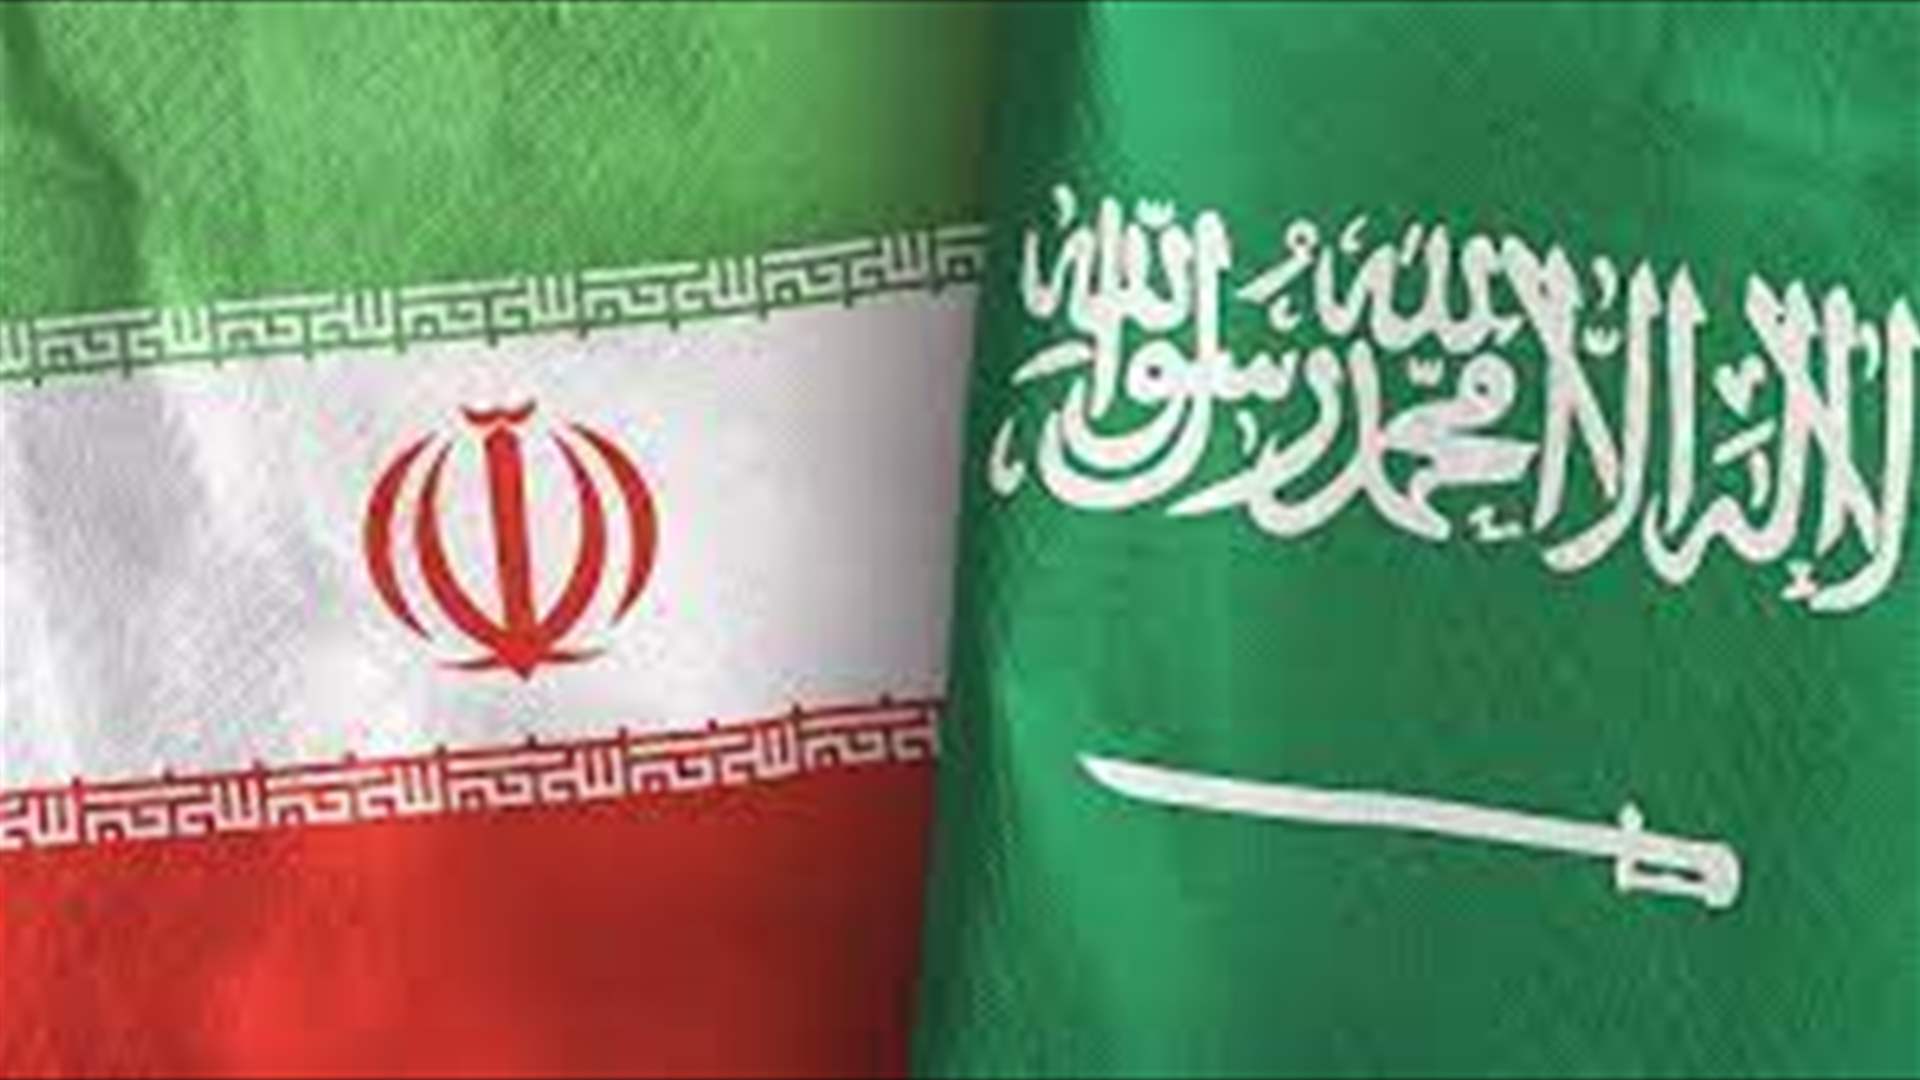 Iran and KSA: Messages exchanged on Iran&#39;s national day